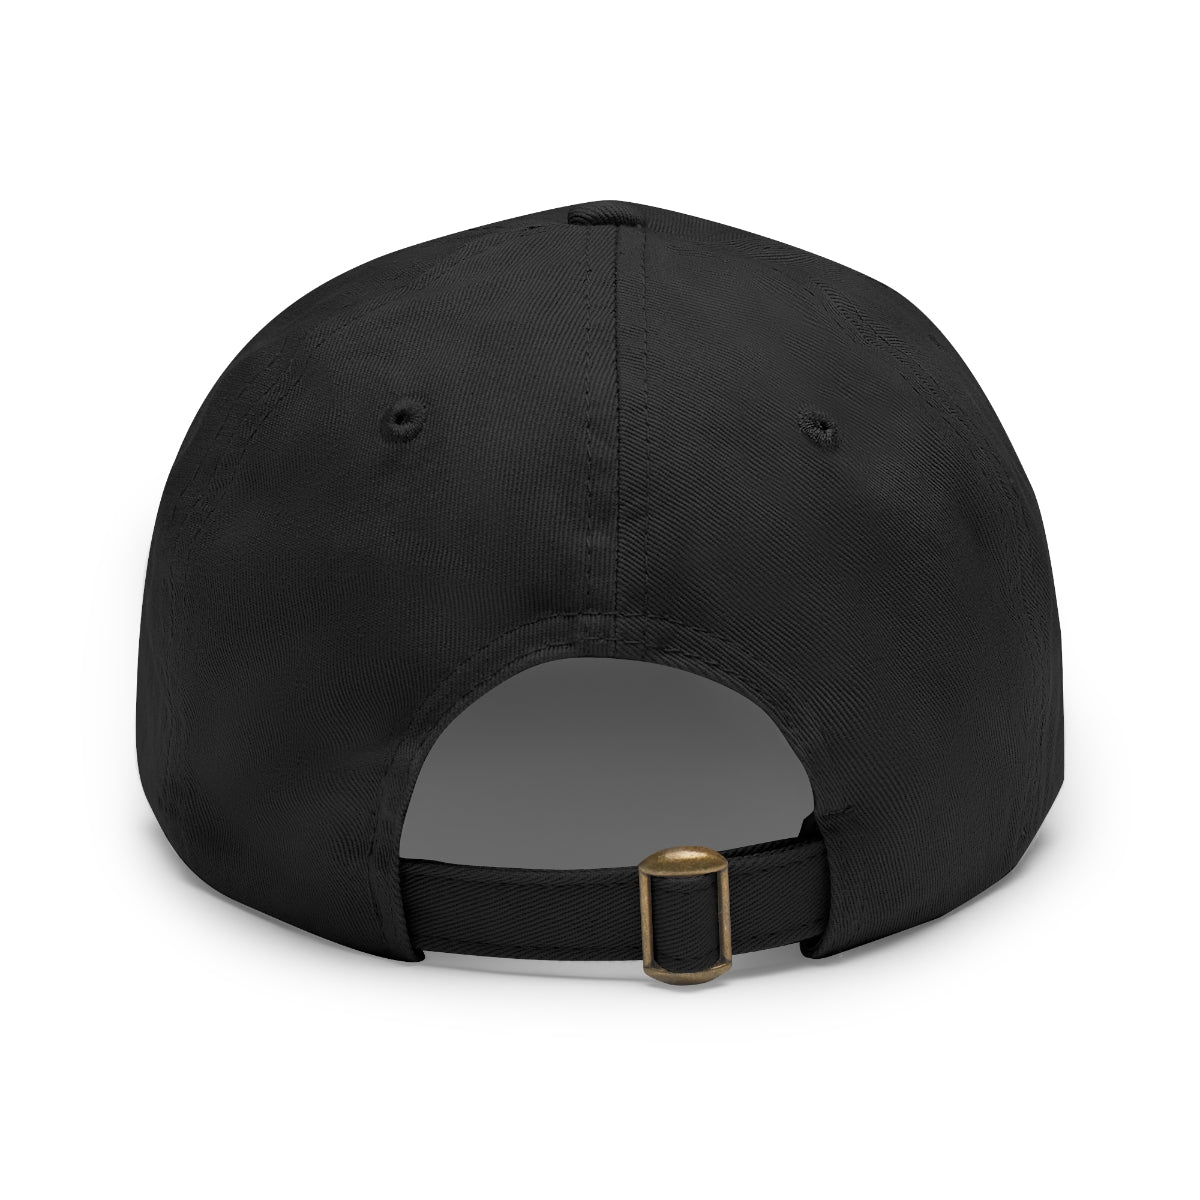 "A Shift in Perspective" Podcast Hat with Leather Patch